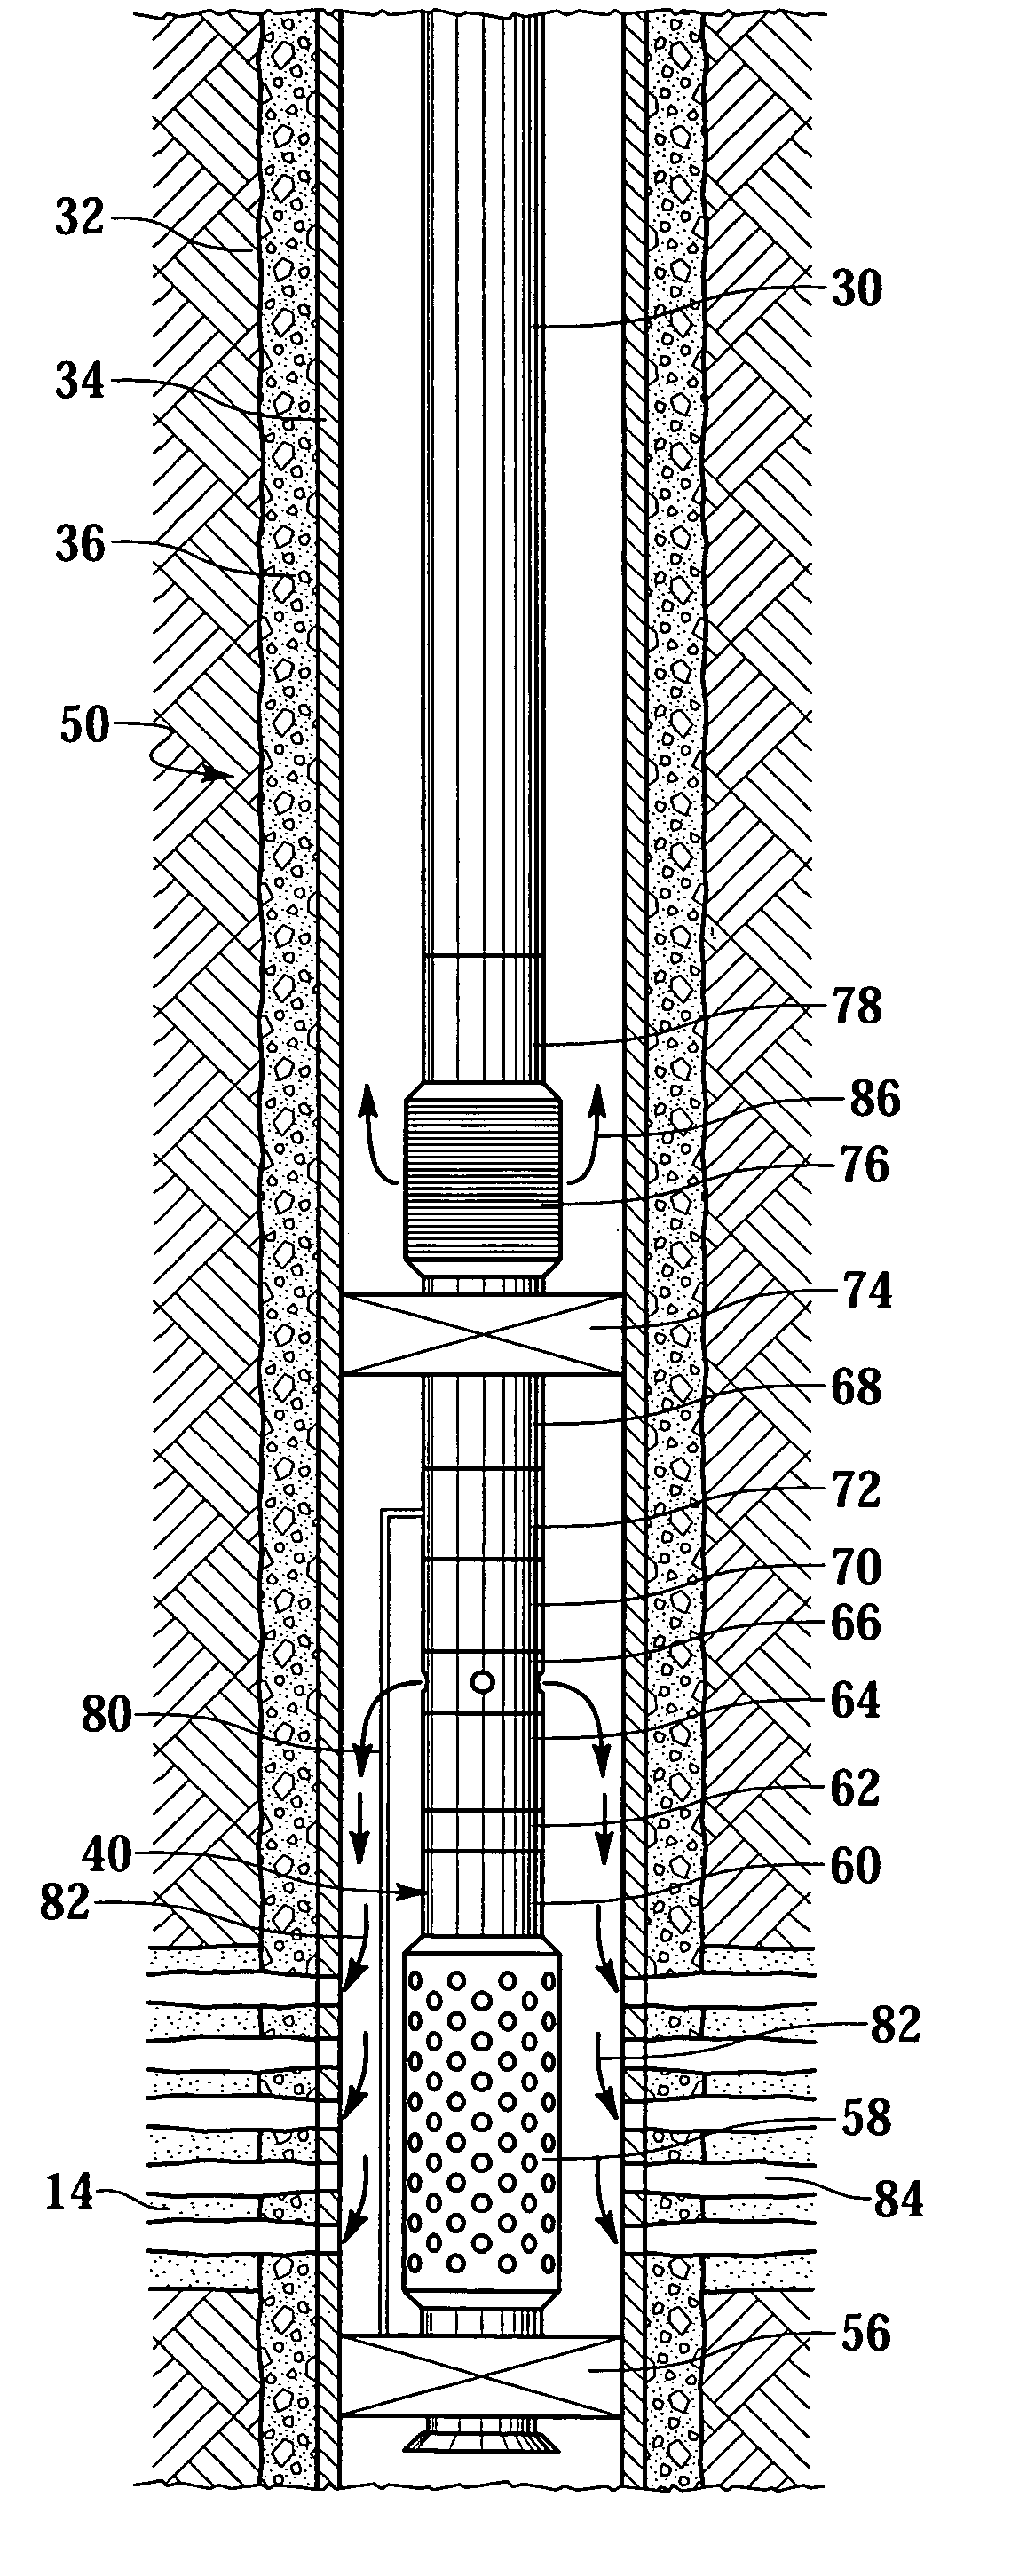 Downhole completion system and method for completing a well